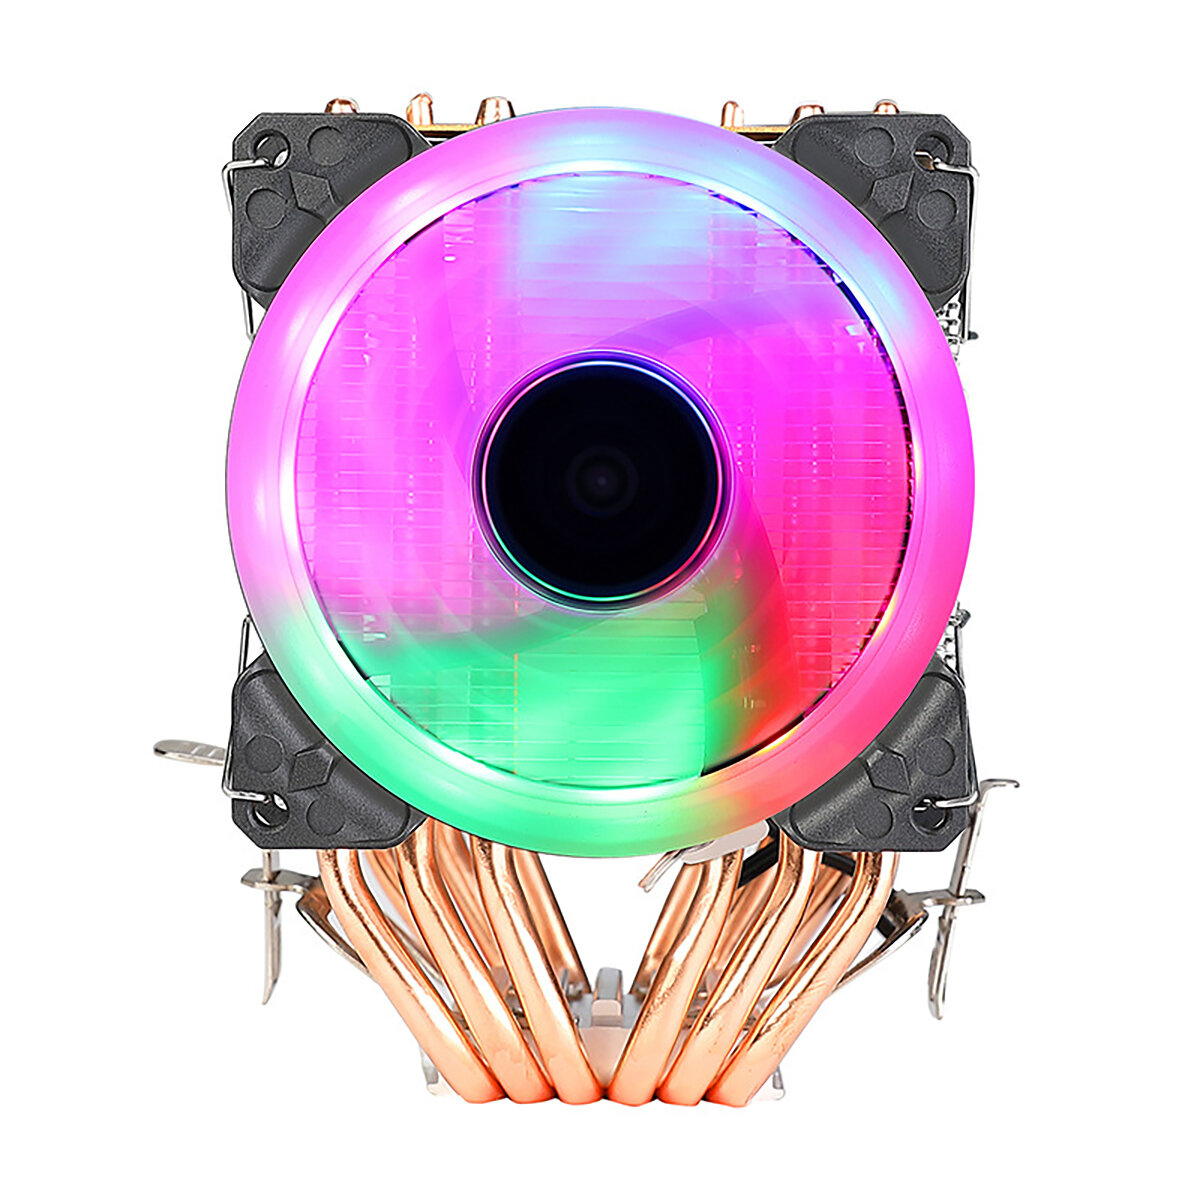 

EVESKY CPU Cooling Fan 1/2/3 Fans 3/4 Pin 6 Heat Pipes RGB/Without Light Silent Computer Case Cooler CPU Heatsink for In